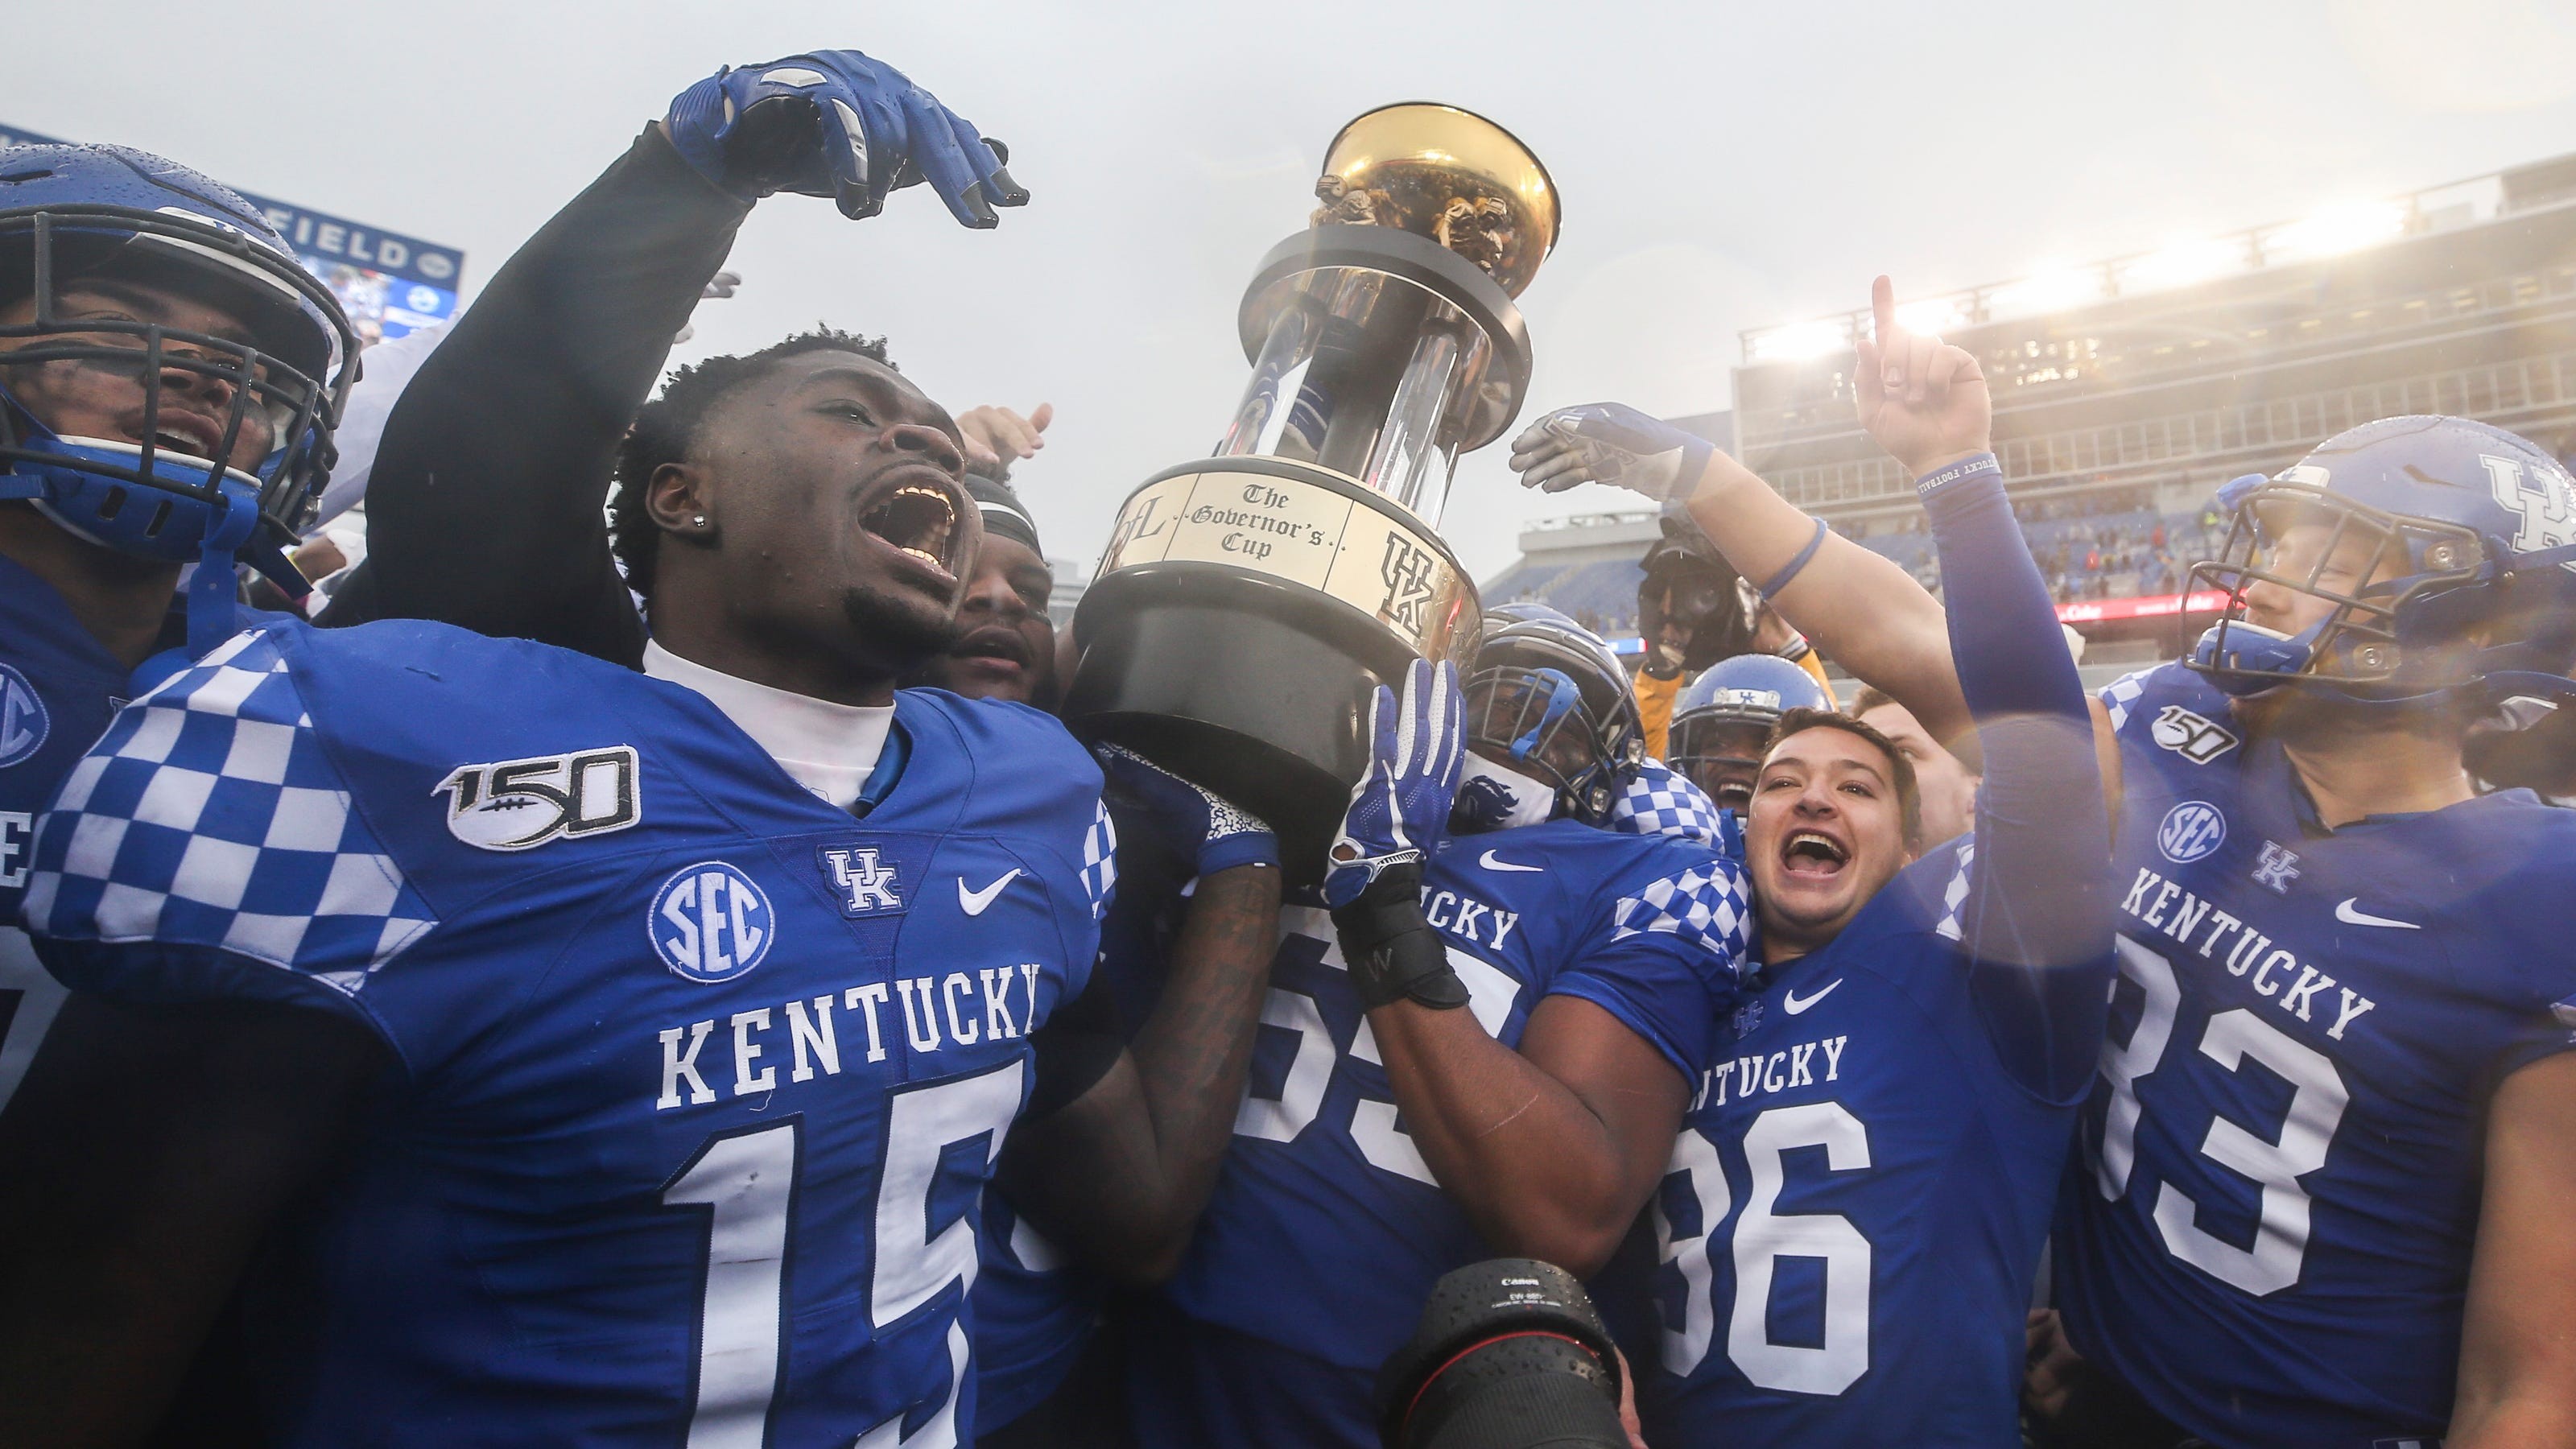 Kickoff time set for 2021 Governor's Cup rivalry between Kentucky and